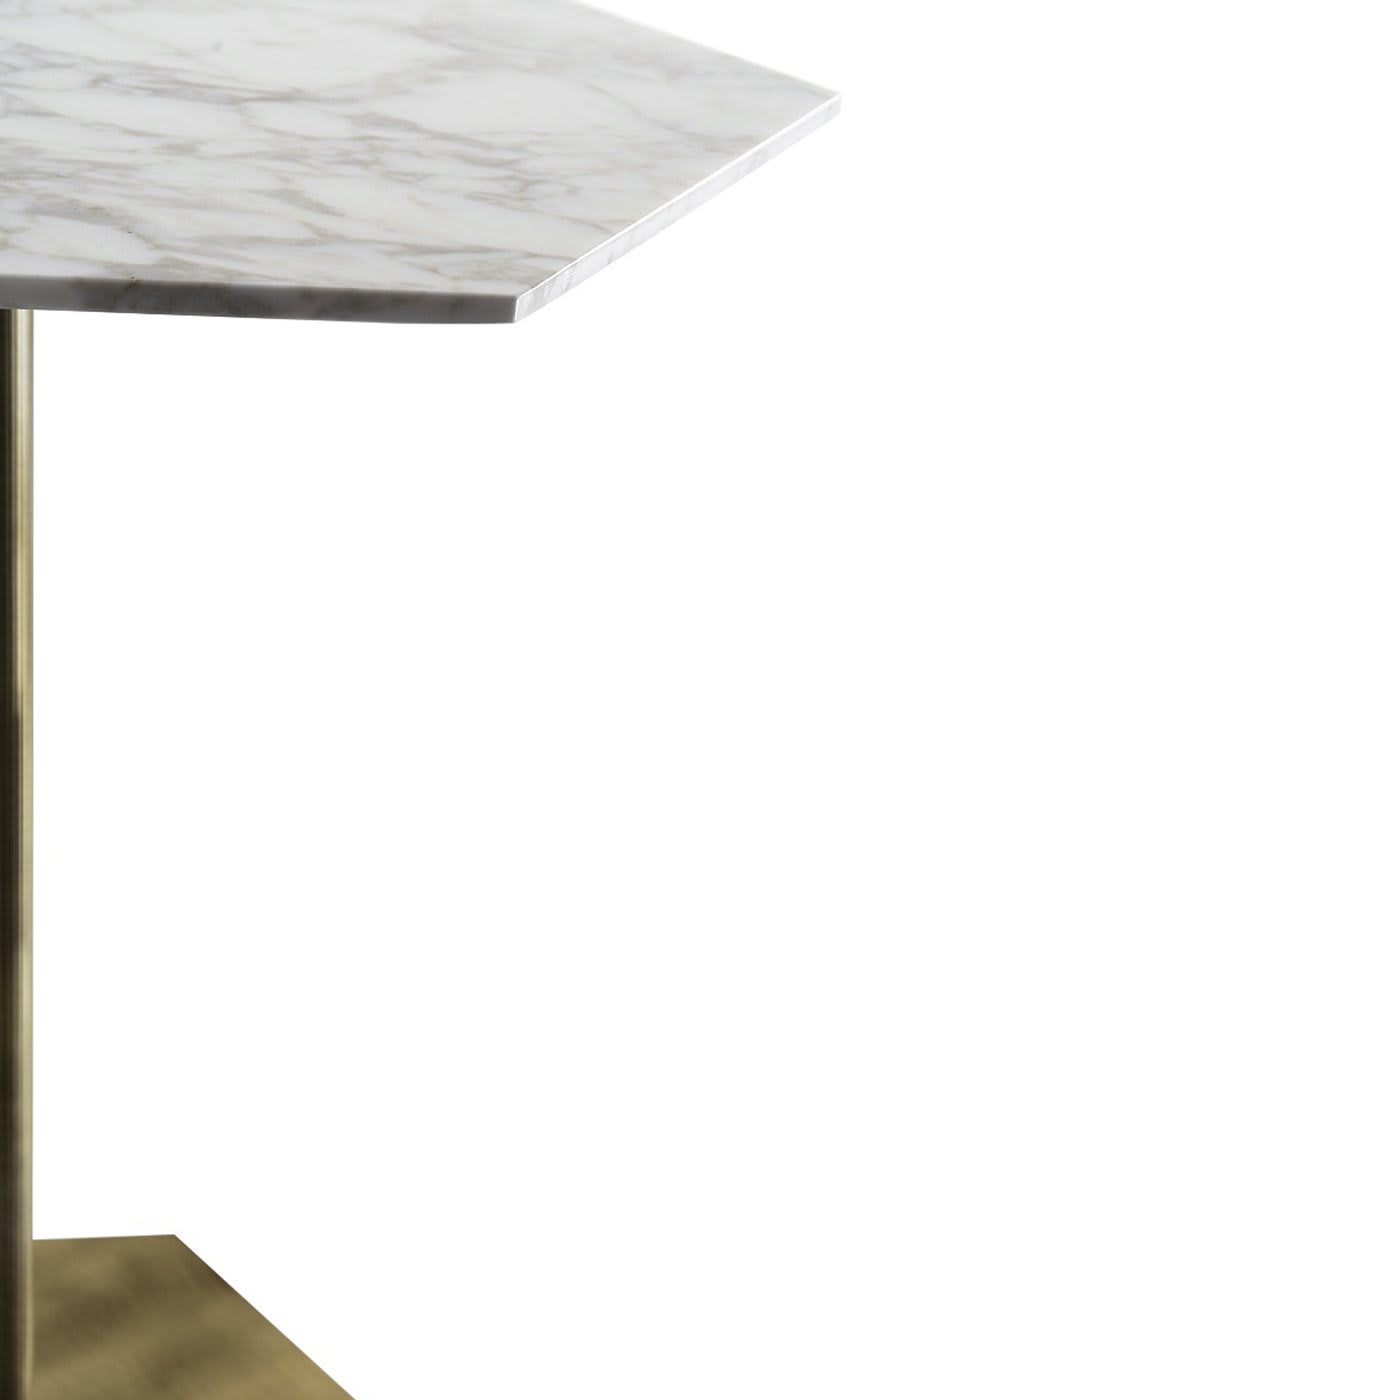 Ted Table with Marble top - Marioni